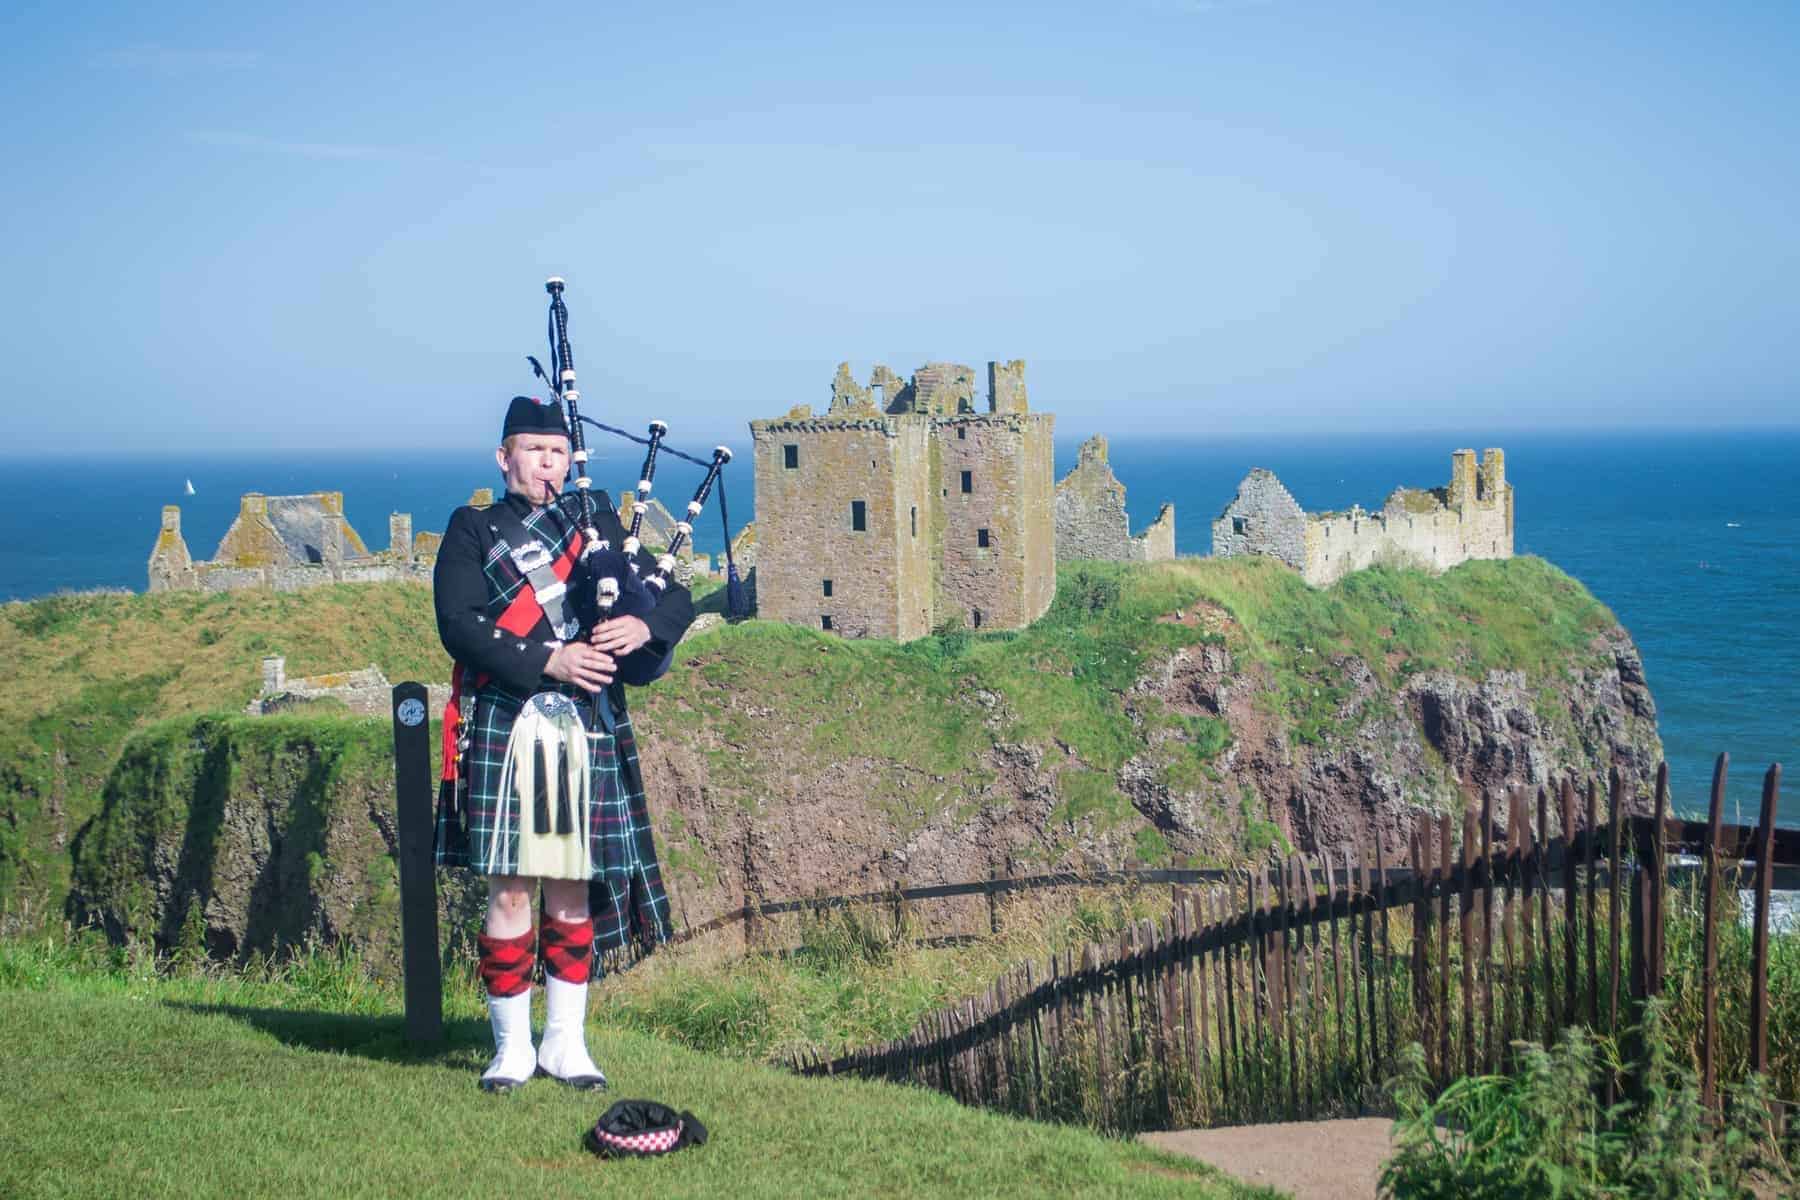 Scottish Piper at Dunnottar Castle, Aberdeenshire, Scotland. He plays pipe with the castle in background